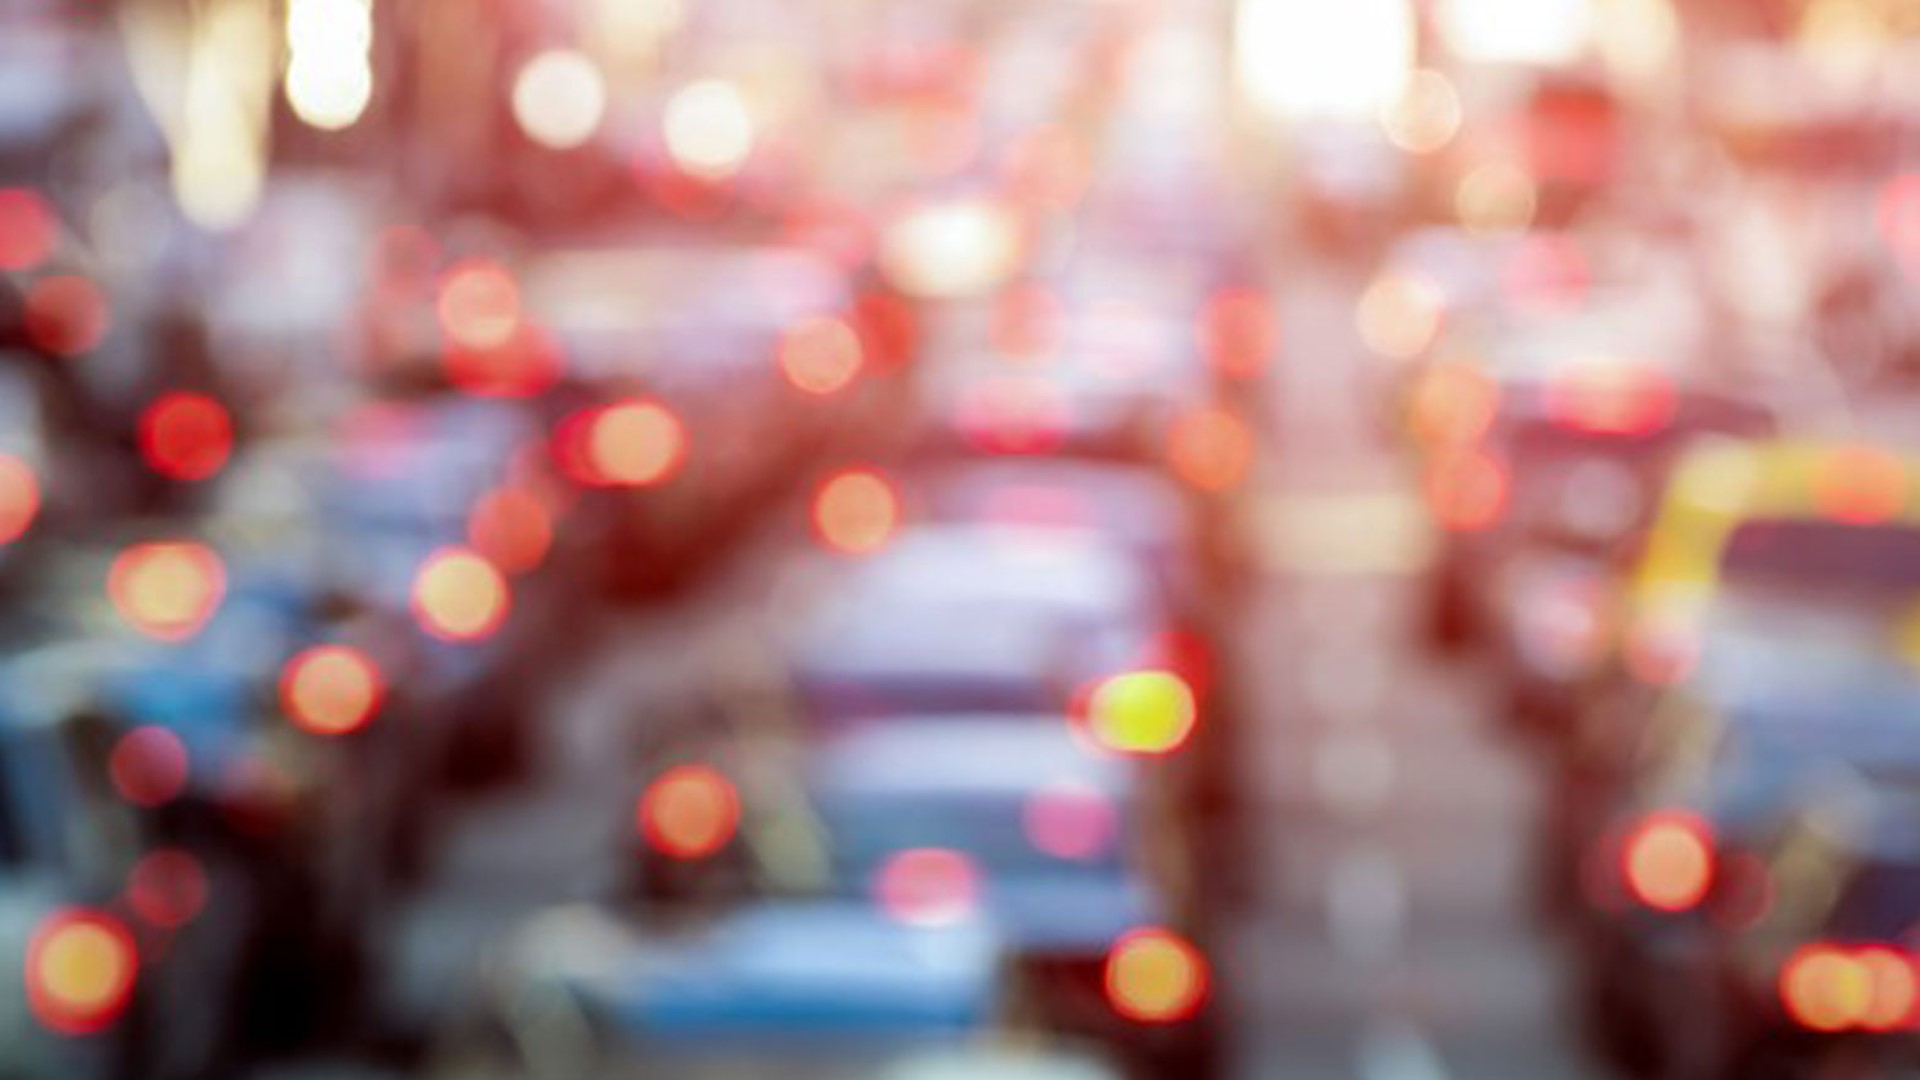 Houstonians lost 74 hours in 2022 in traffic, the INRIX study says.